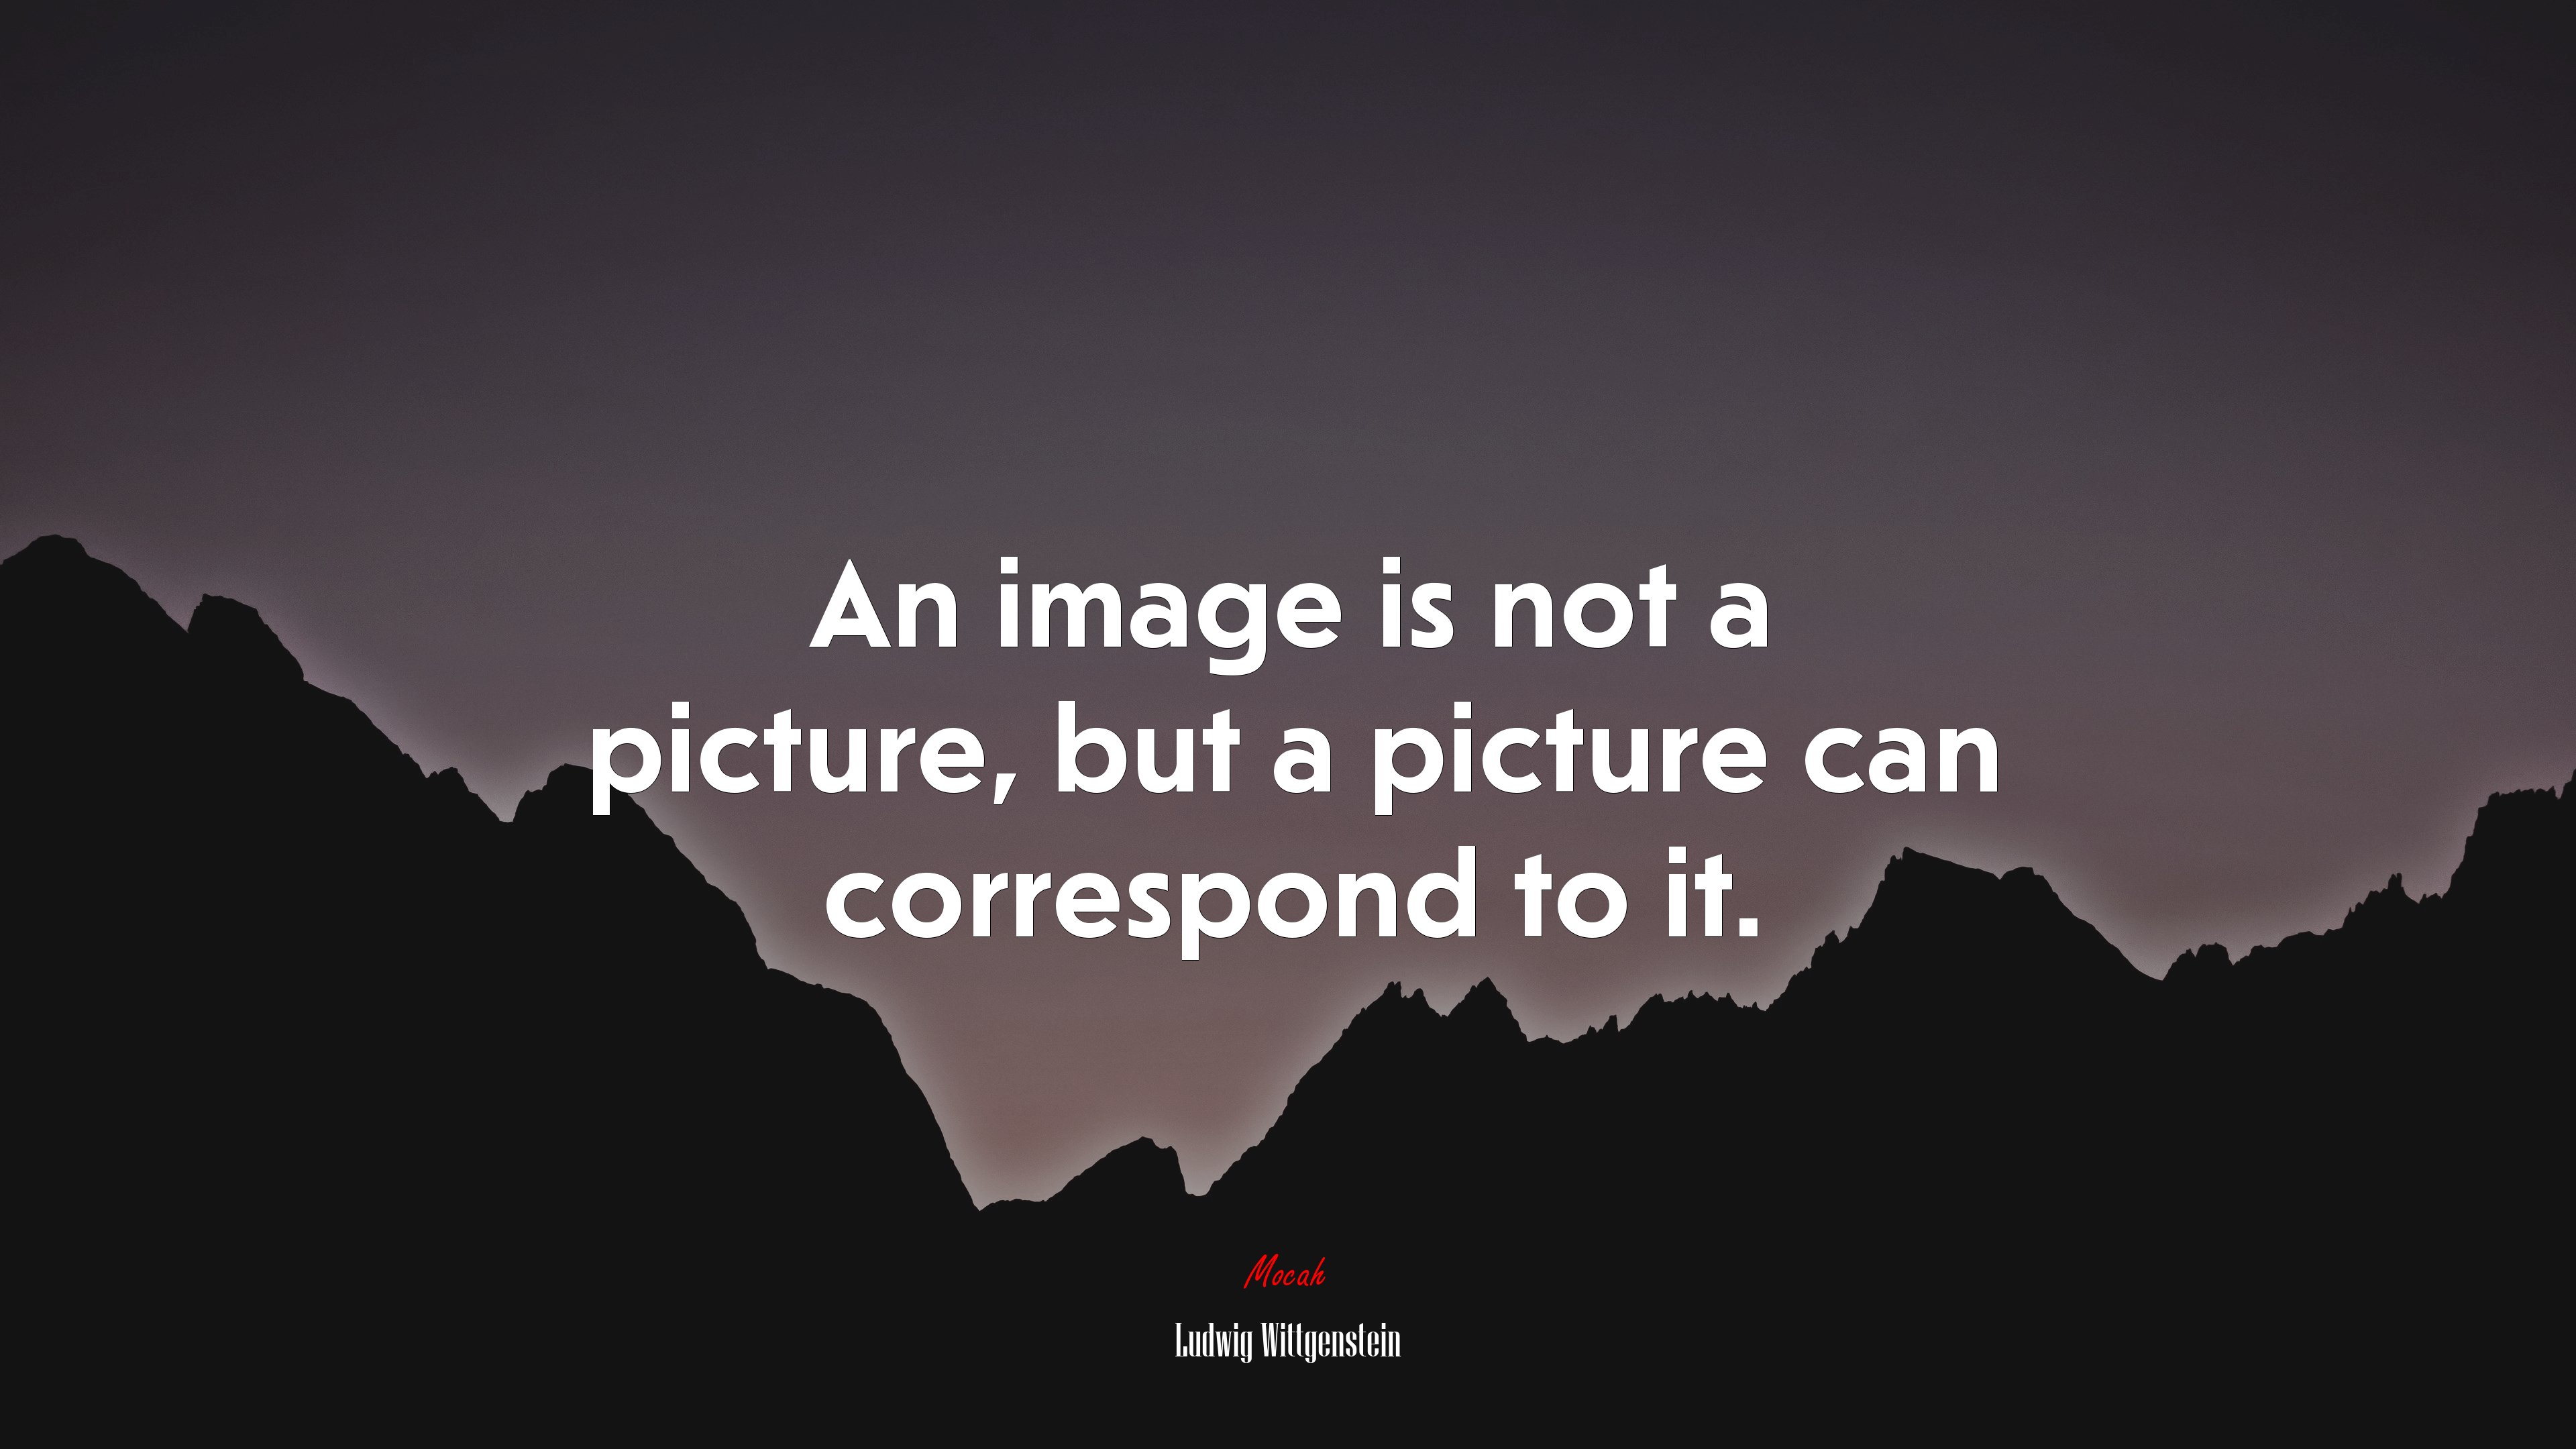 An Image Is Not A Picture But Can Correspond To